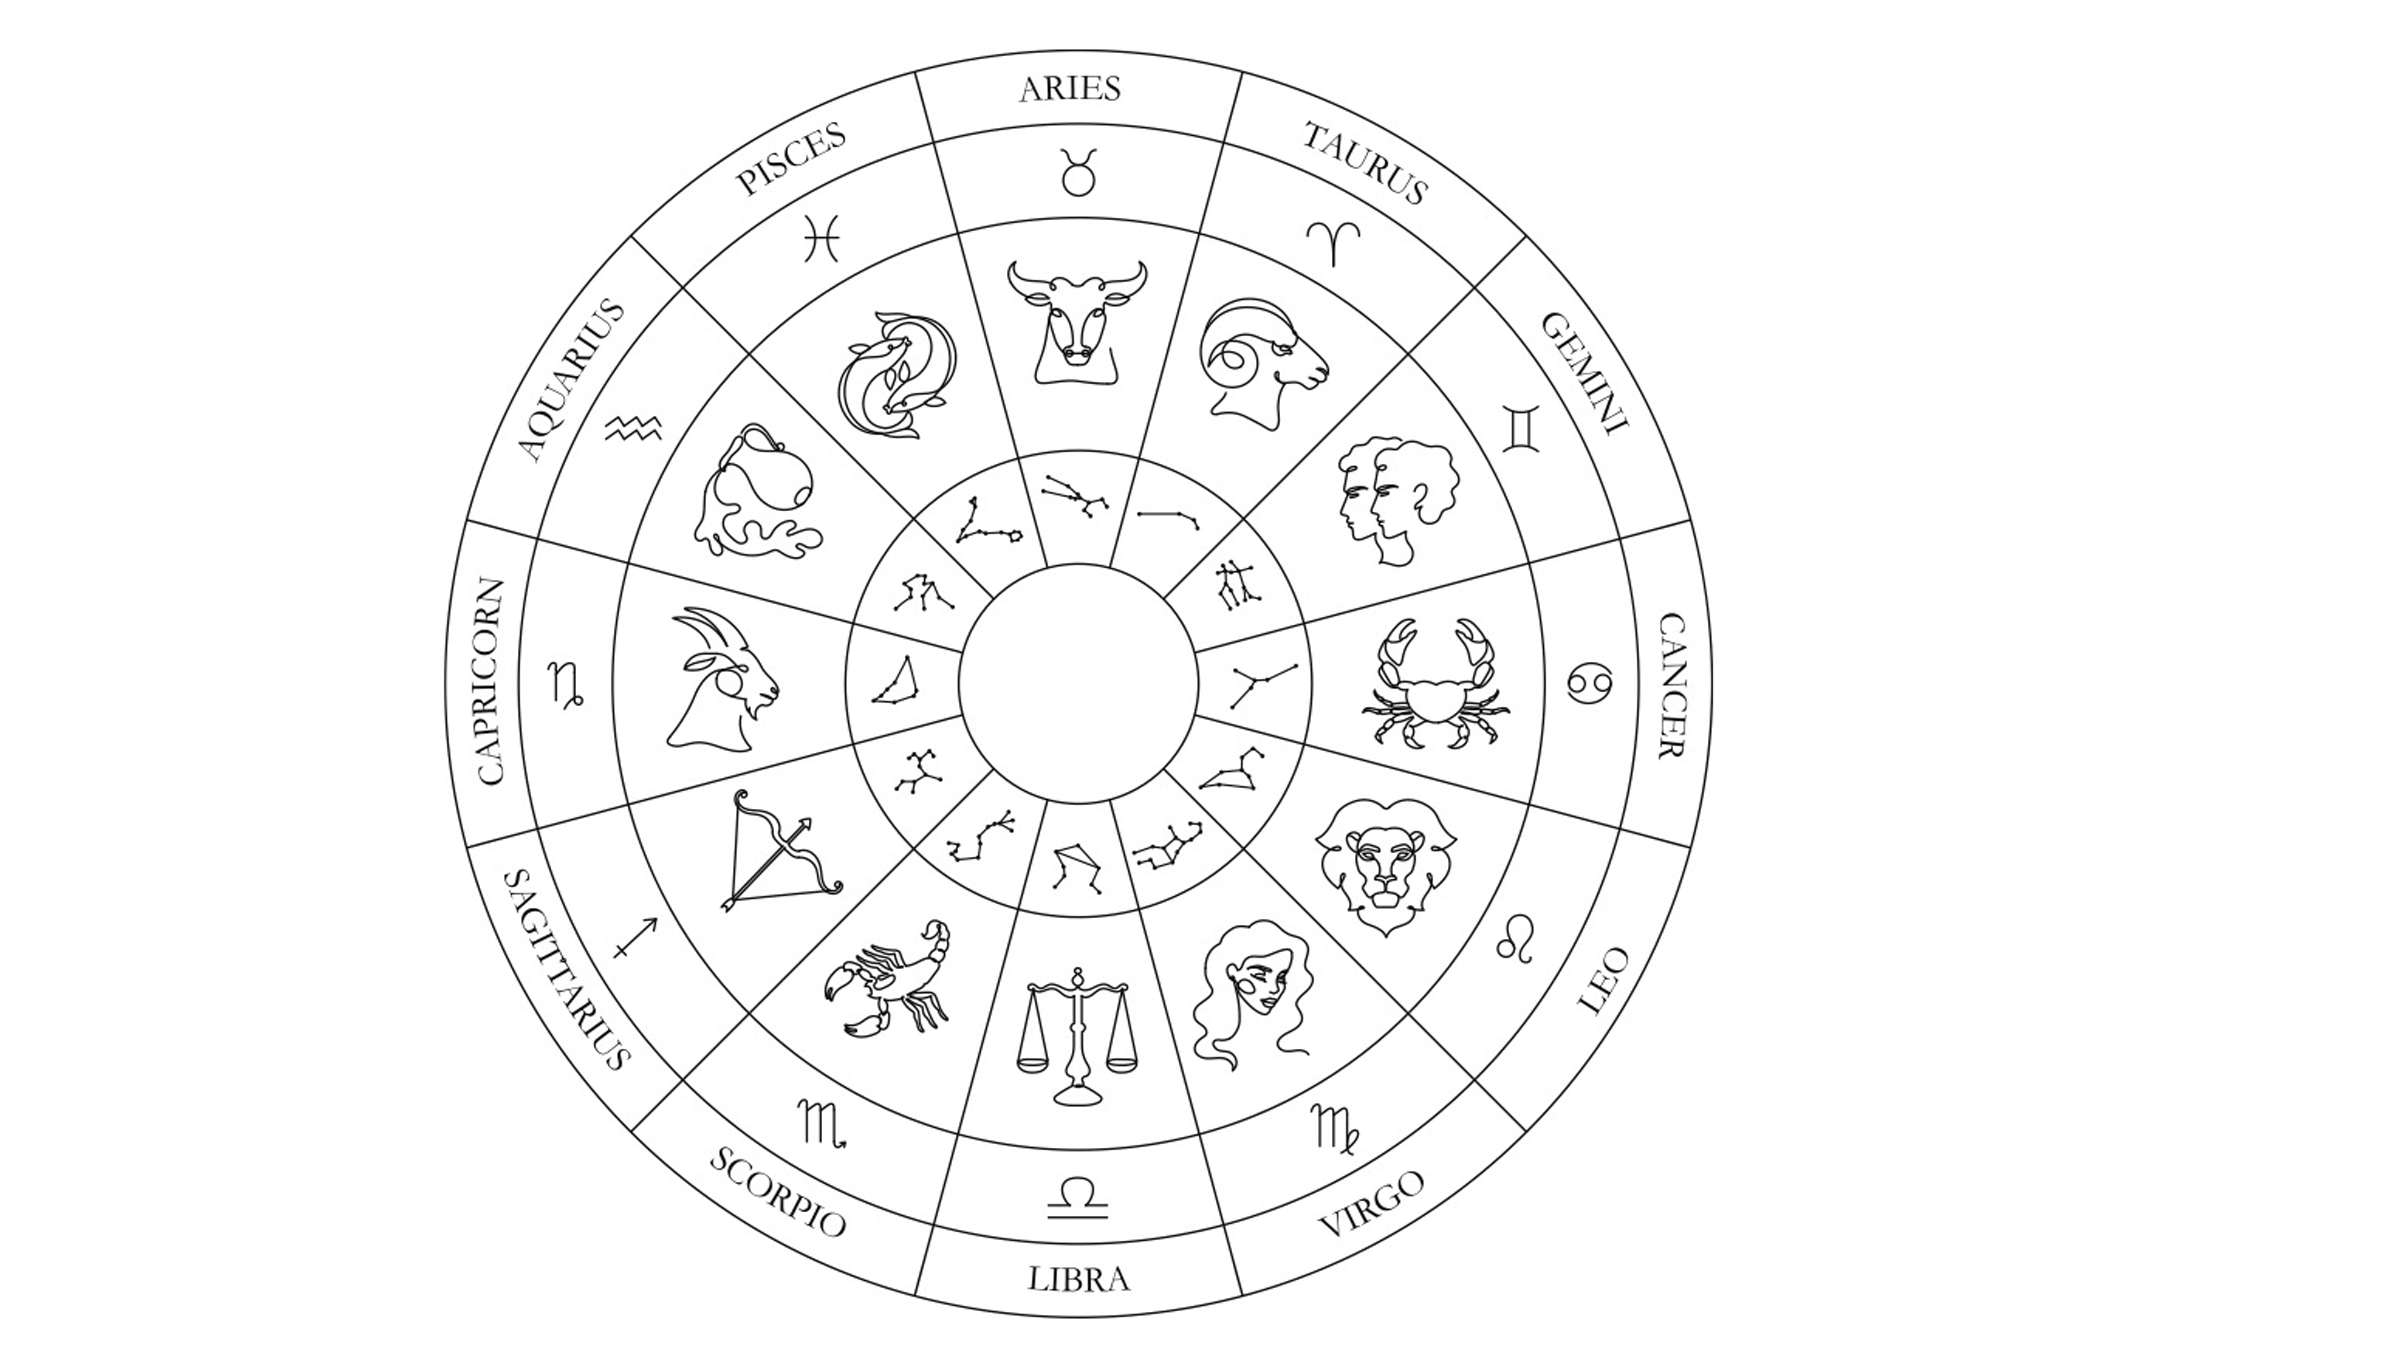 Relationship Preferences of Each Zodiac Sign